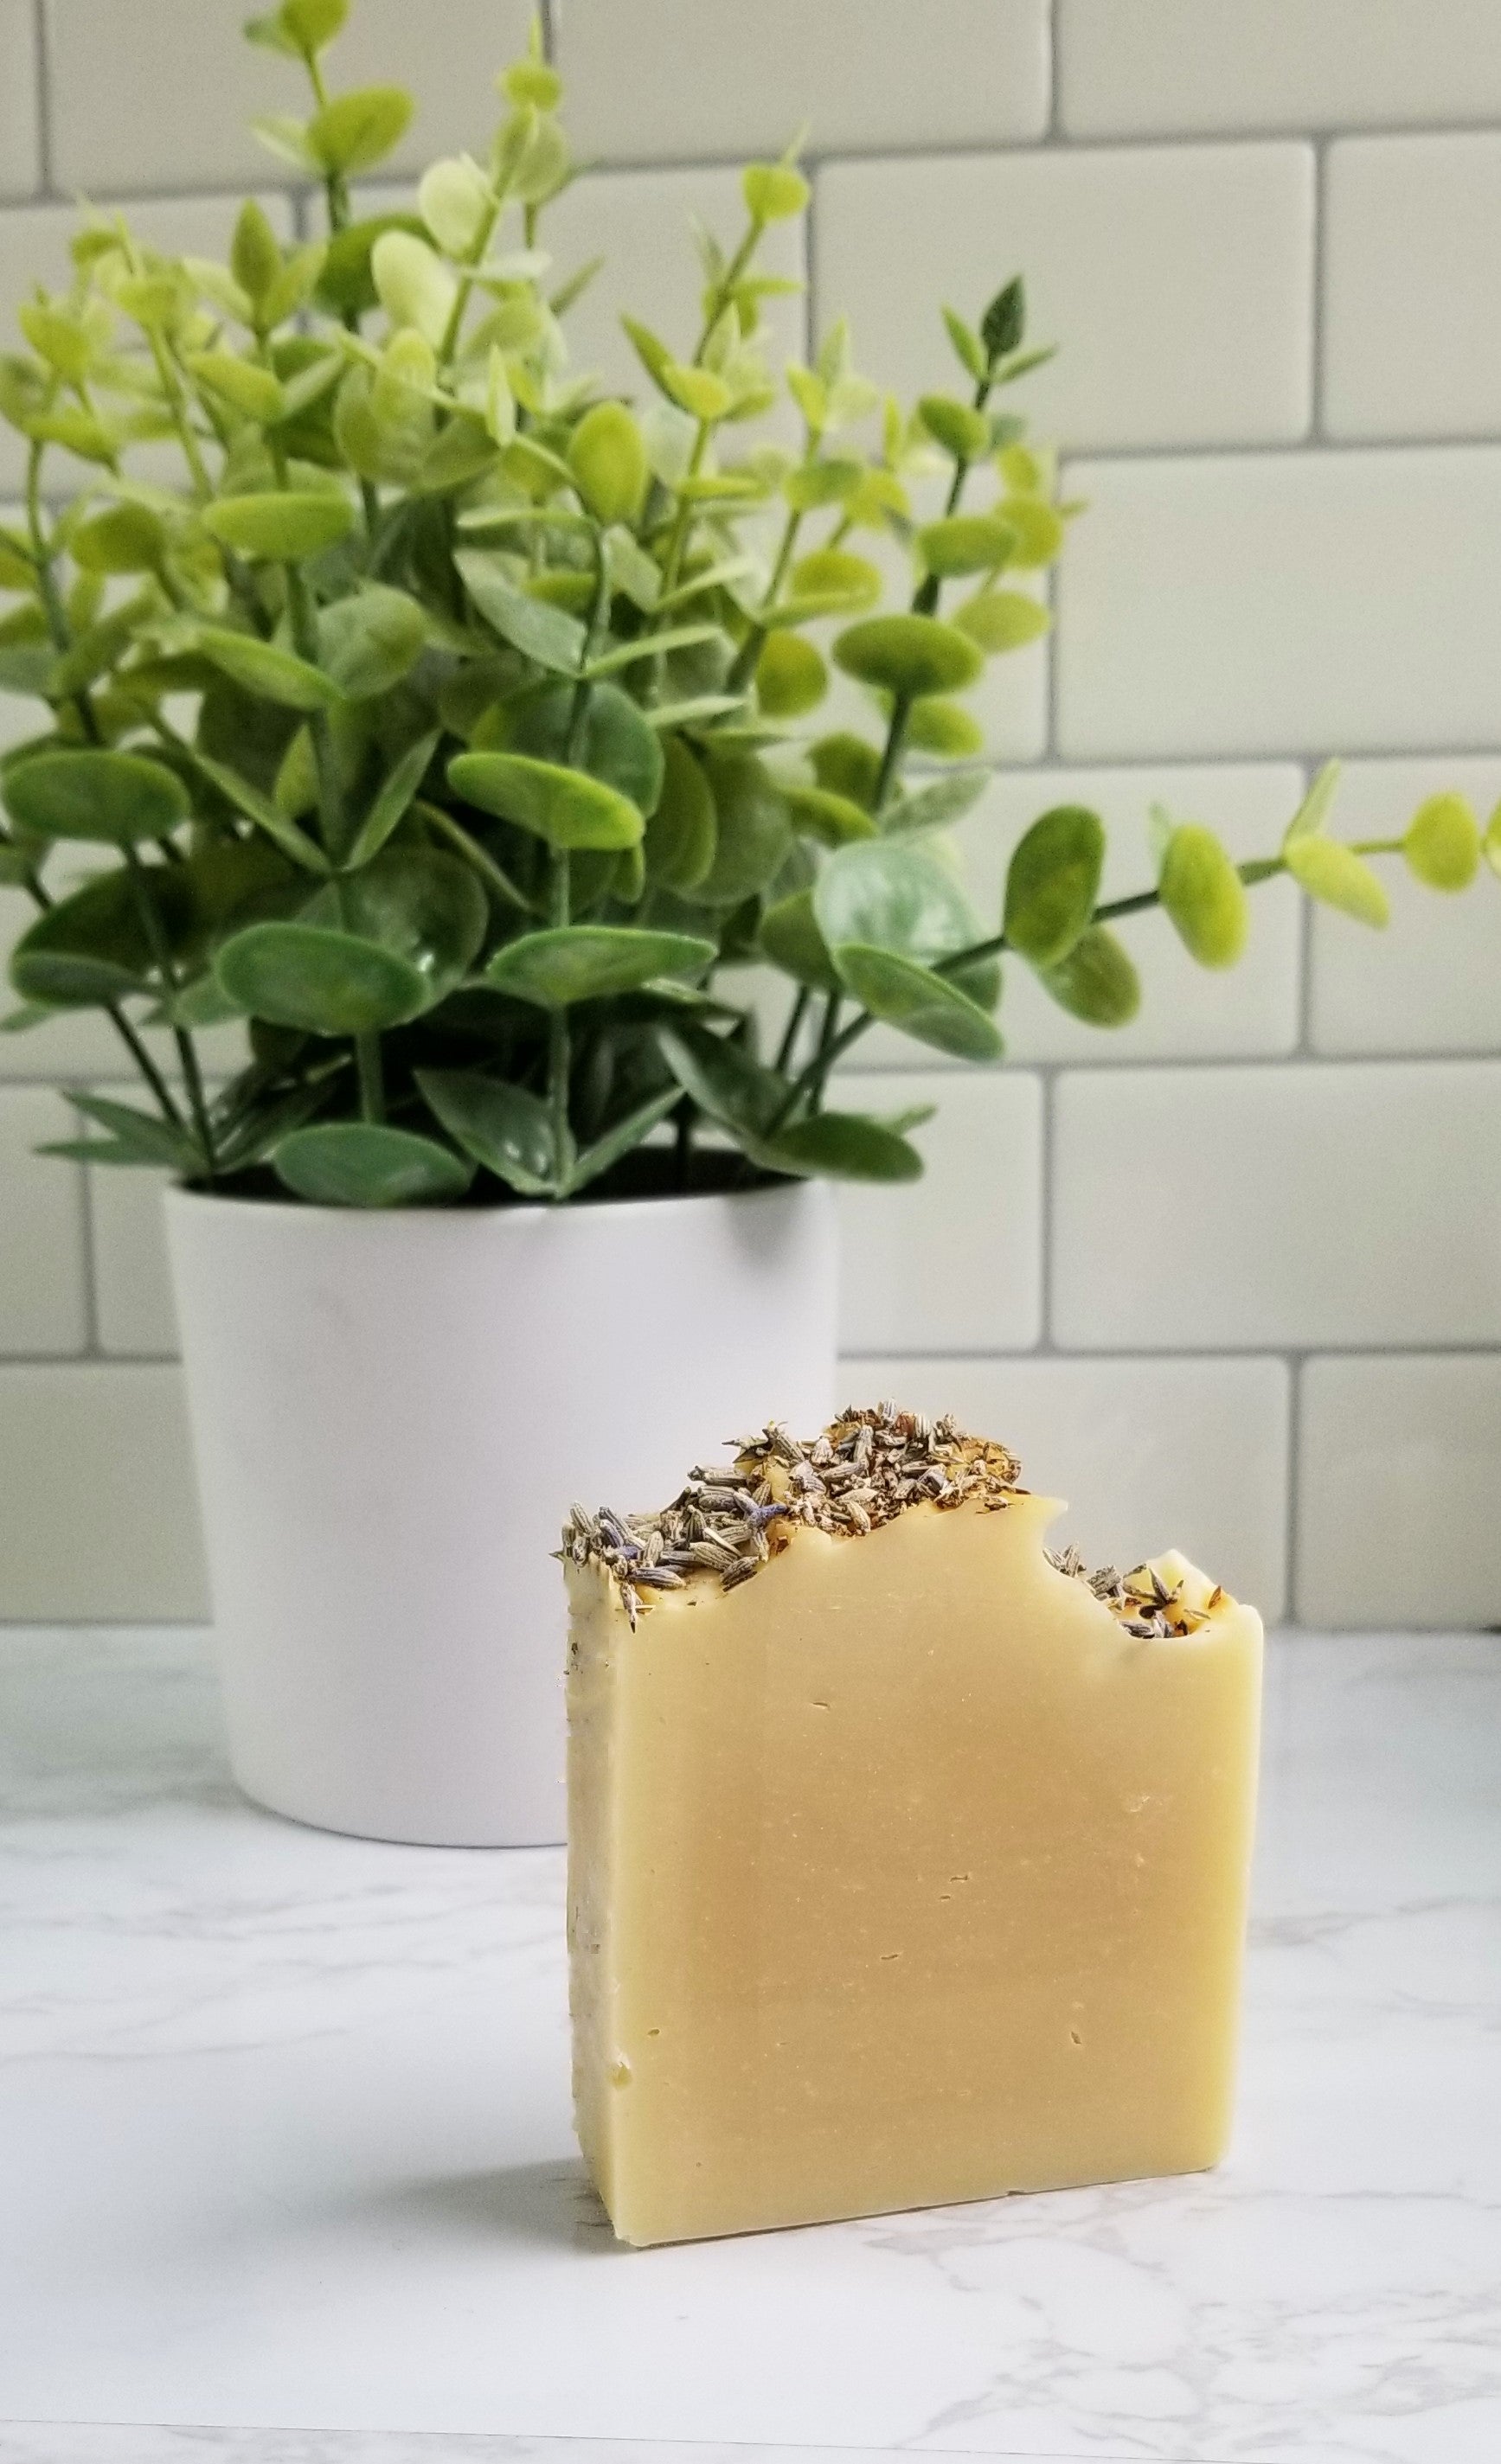 soap with herbs on top